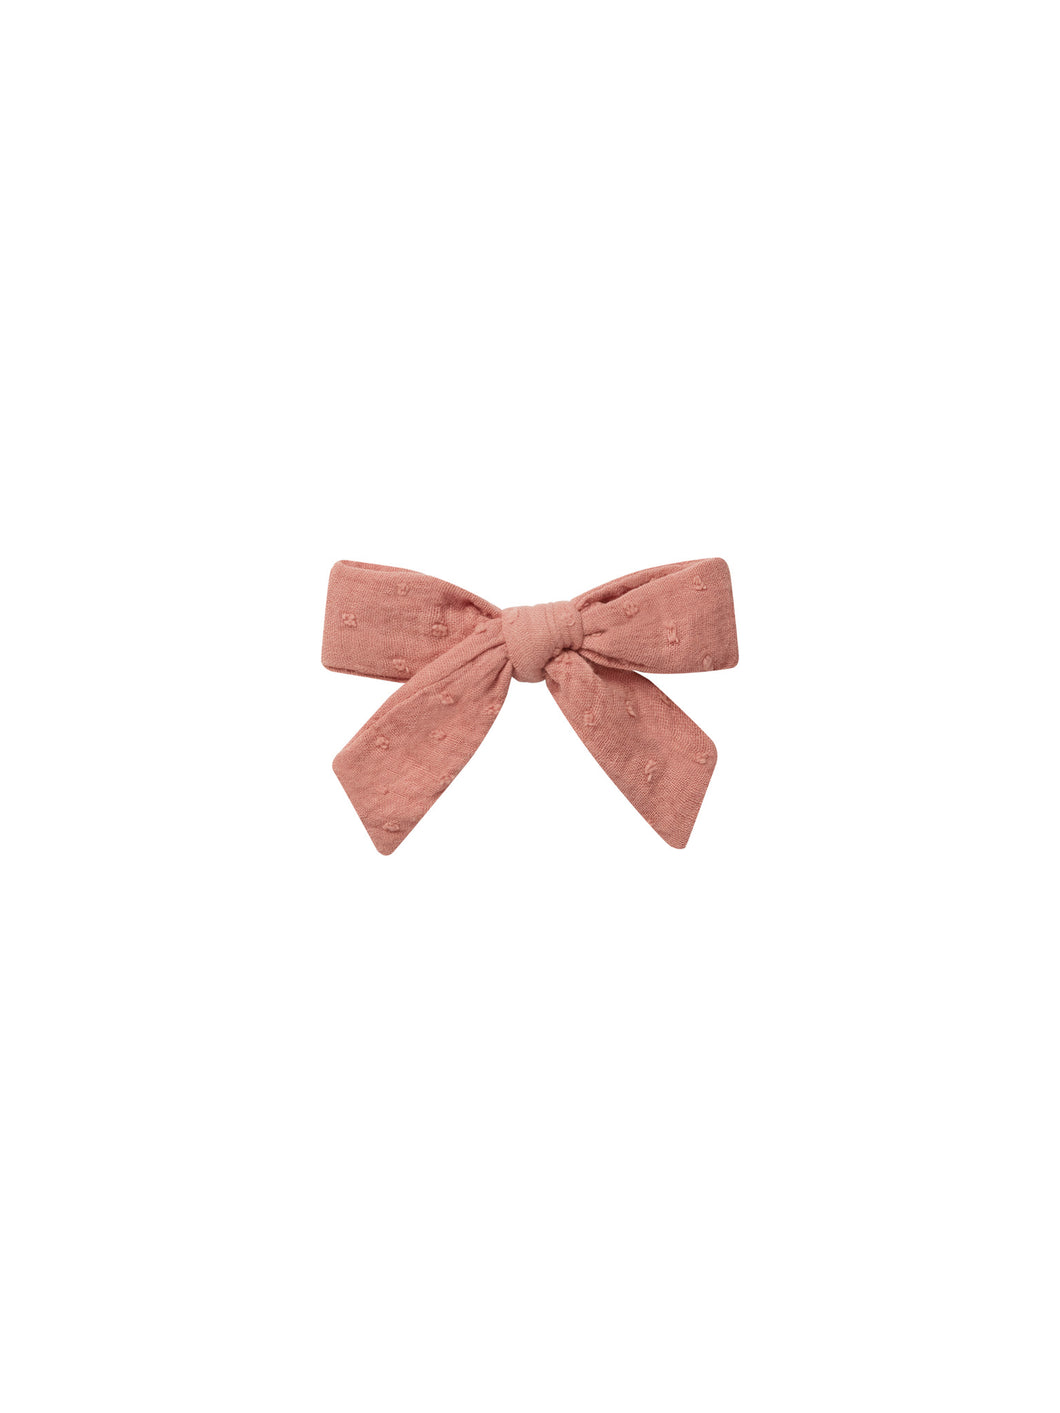 Woven swiss dot cotton bows with clips.  Featured in mauve pink.